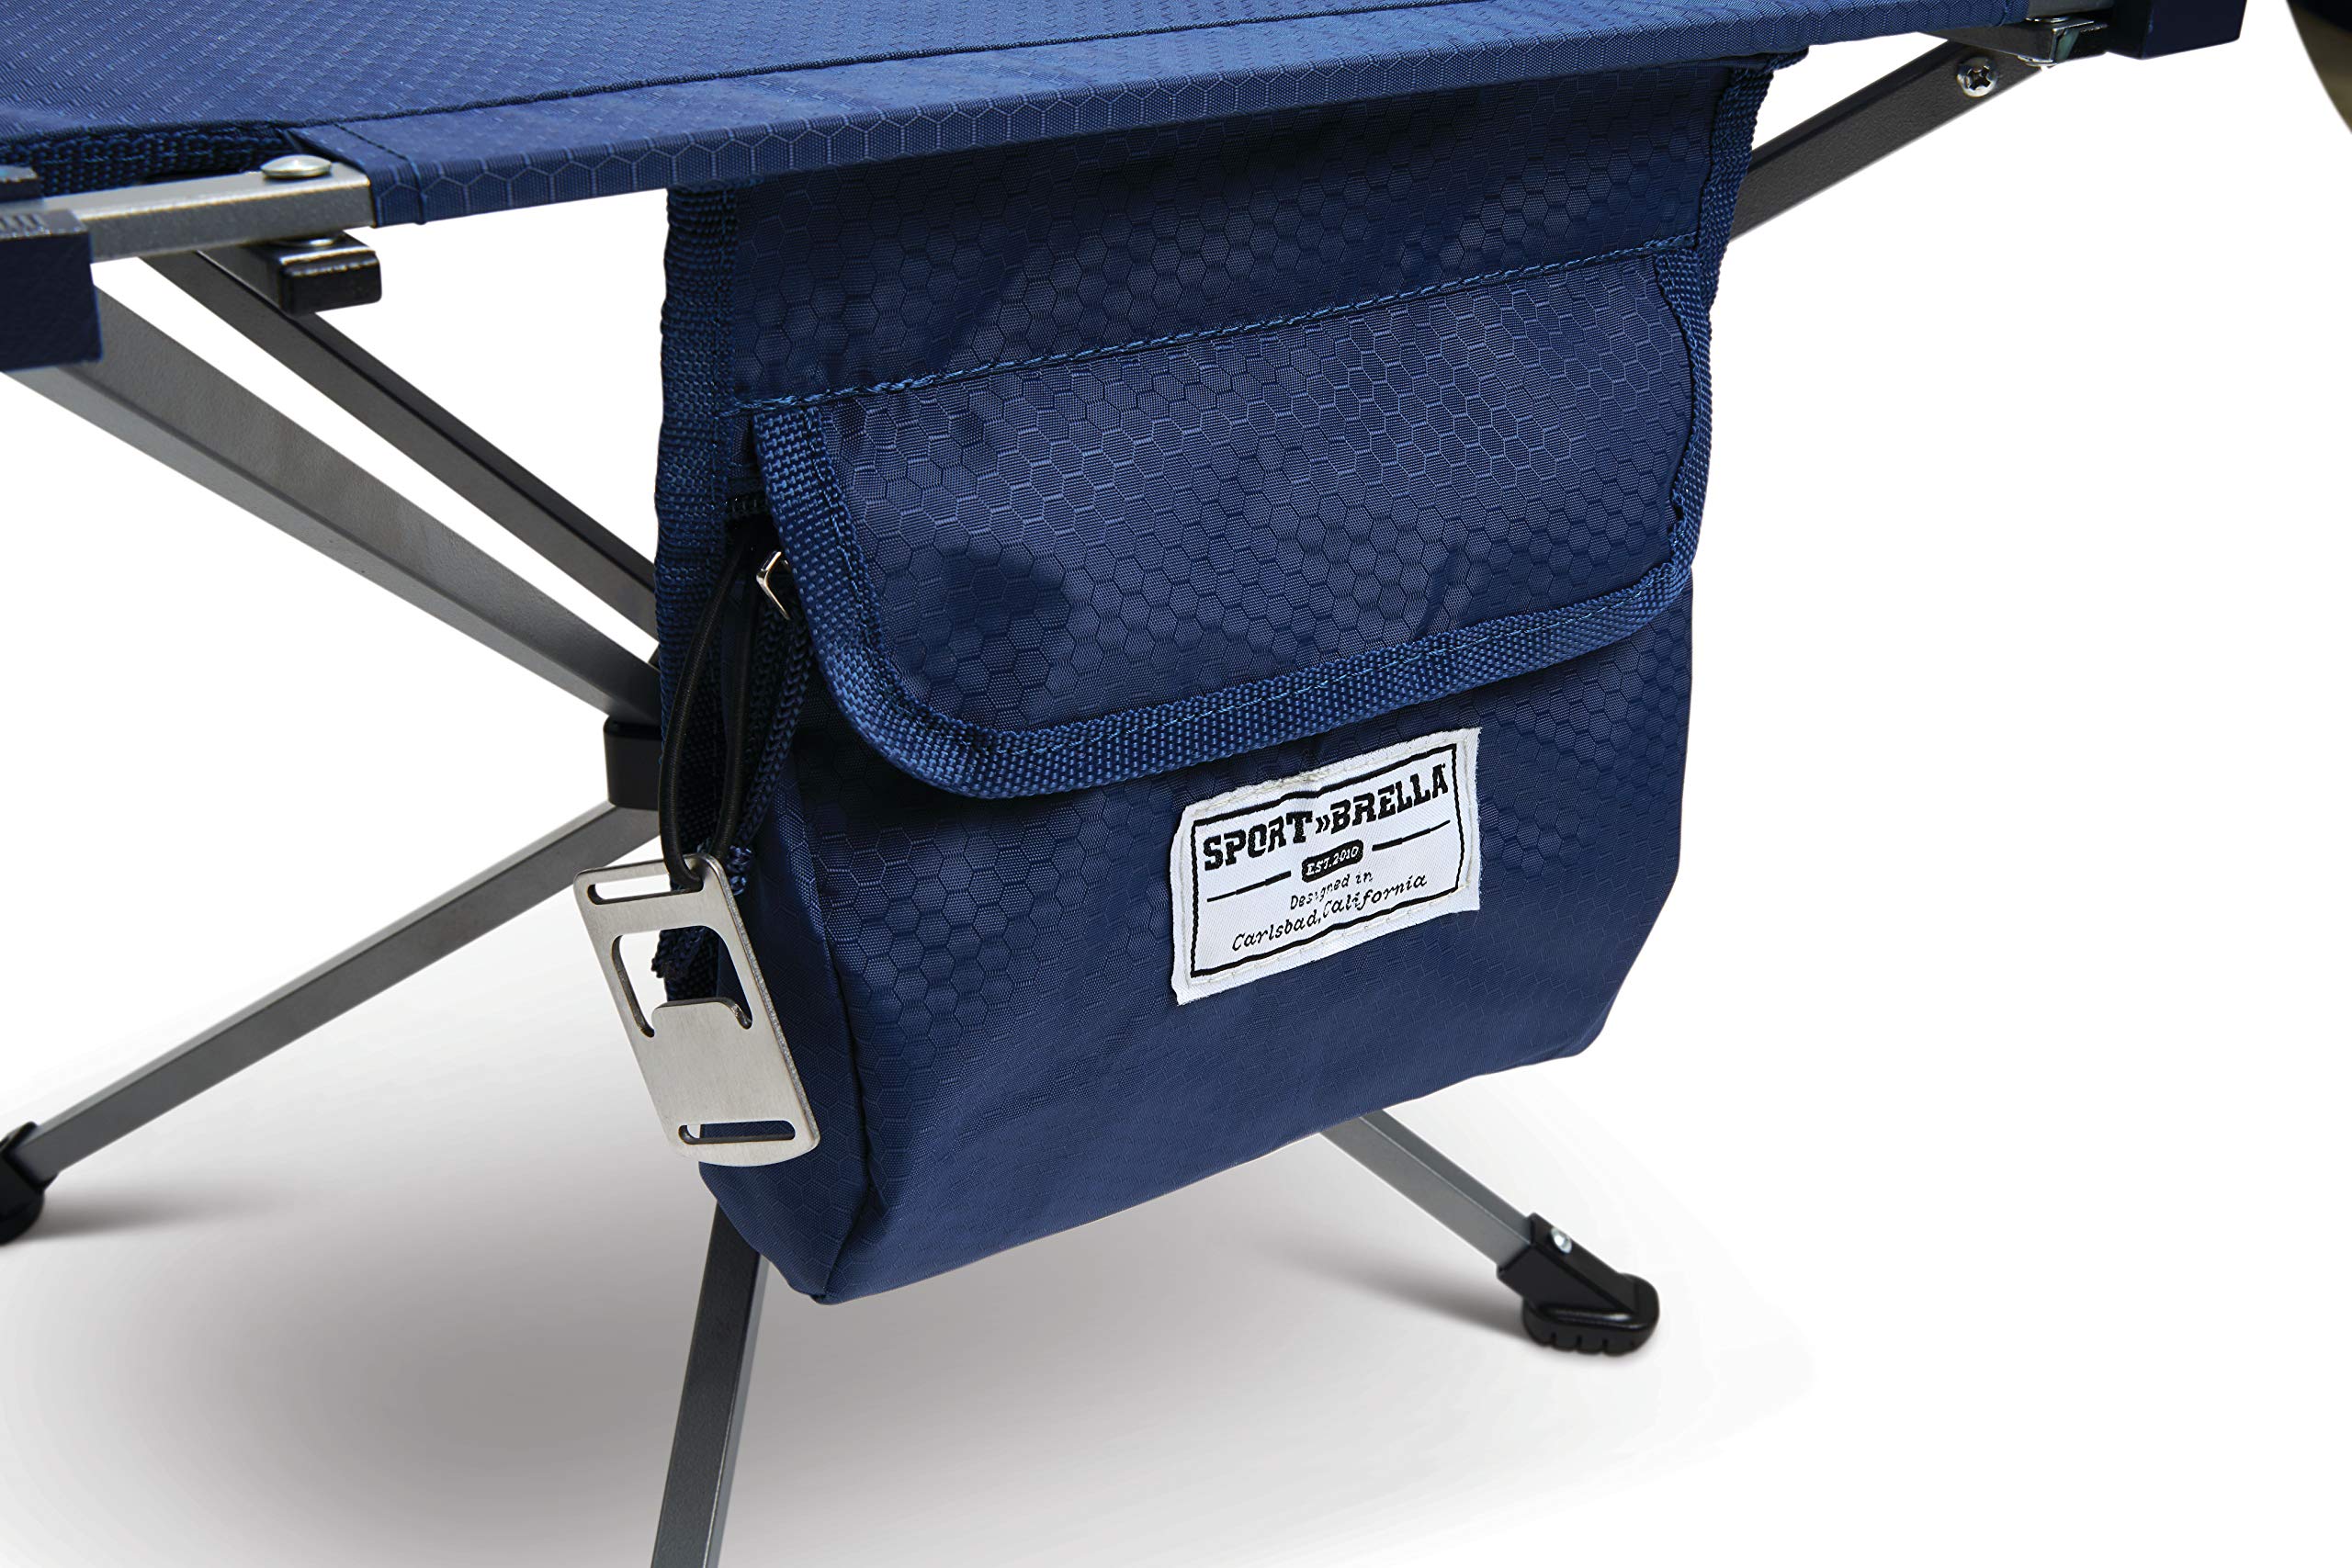 Sport-Brella SunSoul Portable Folding Table for Outdoor Camping, Picnics, Tailgates, and Beach Navy